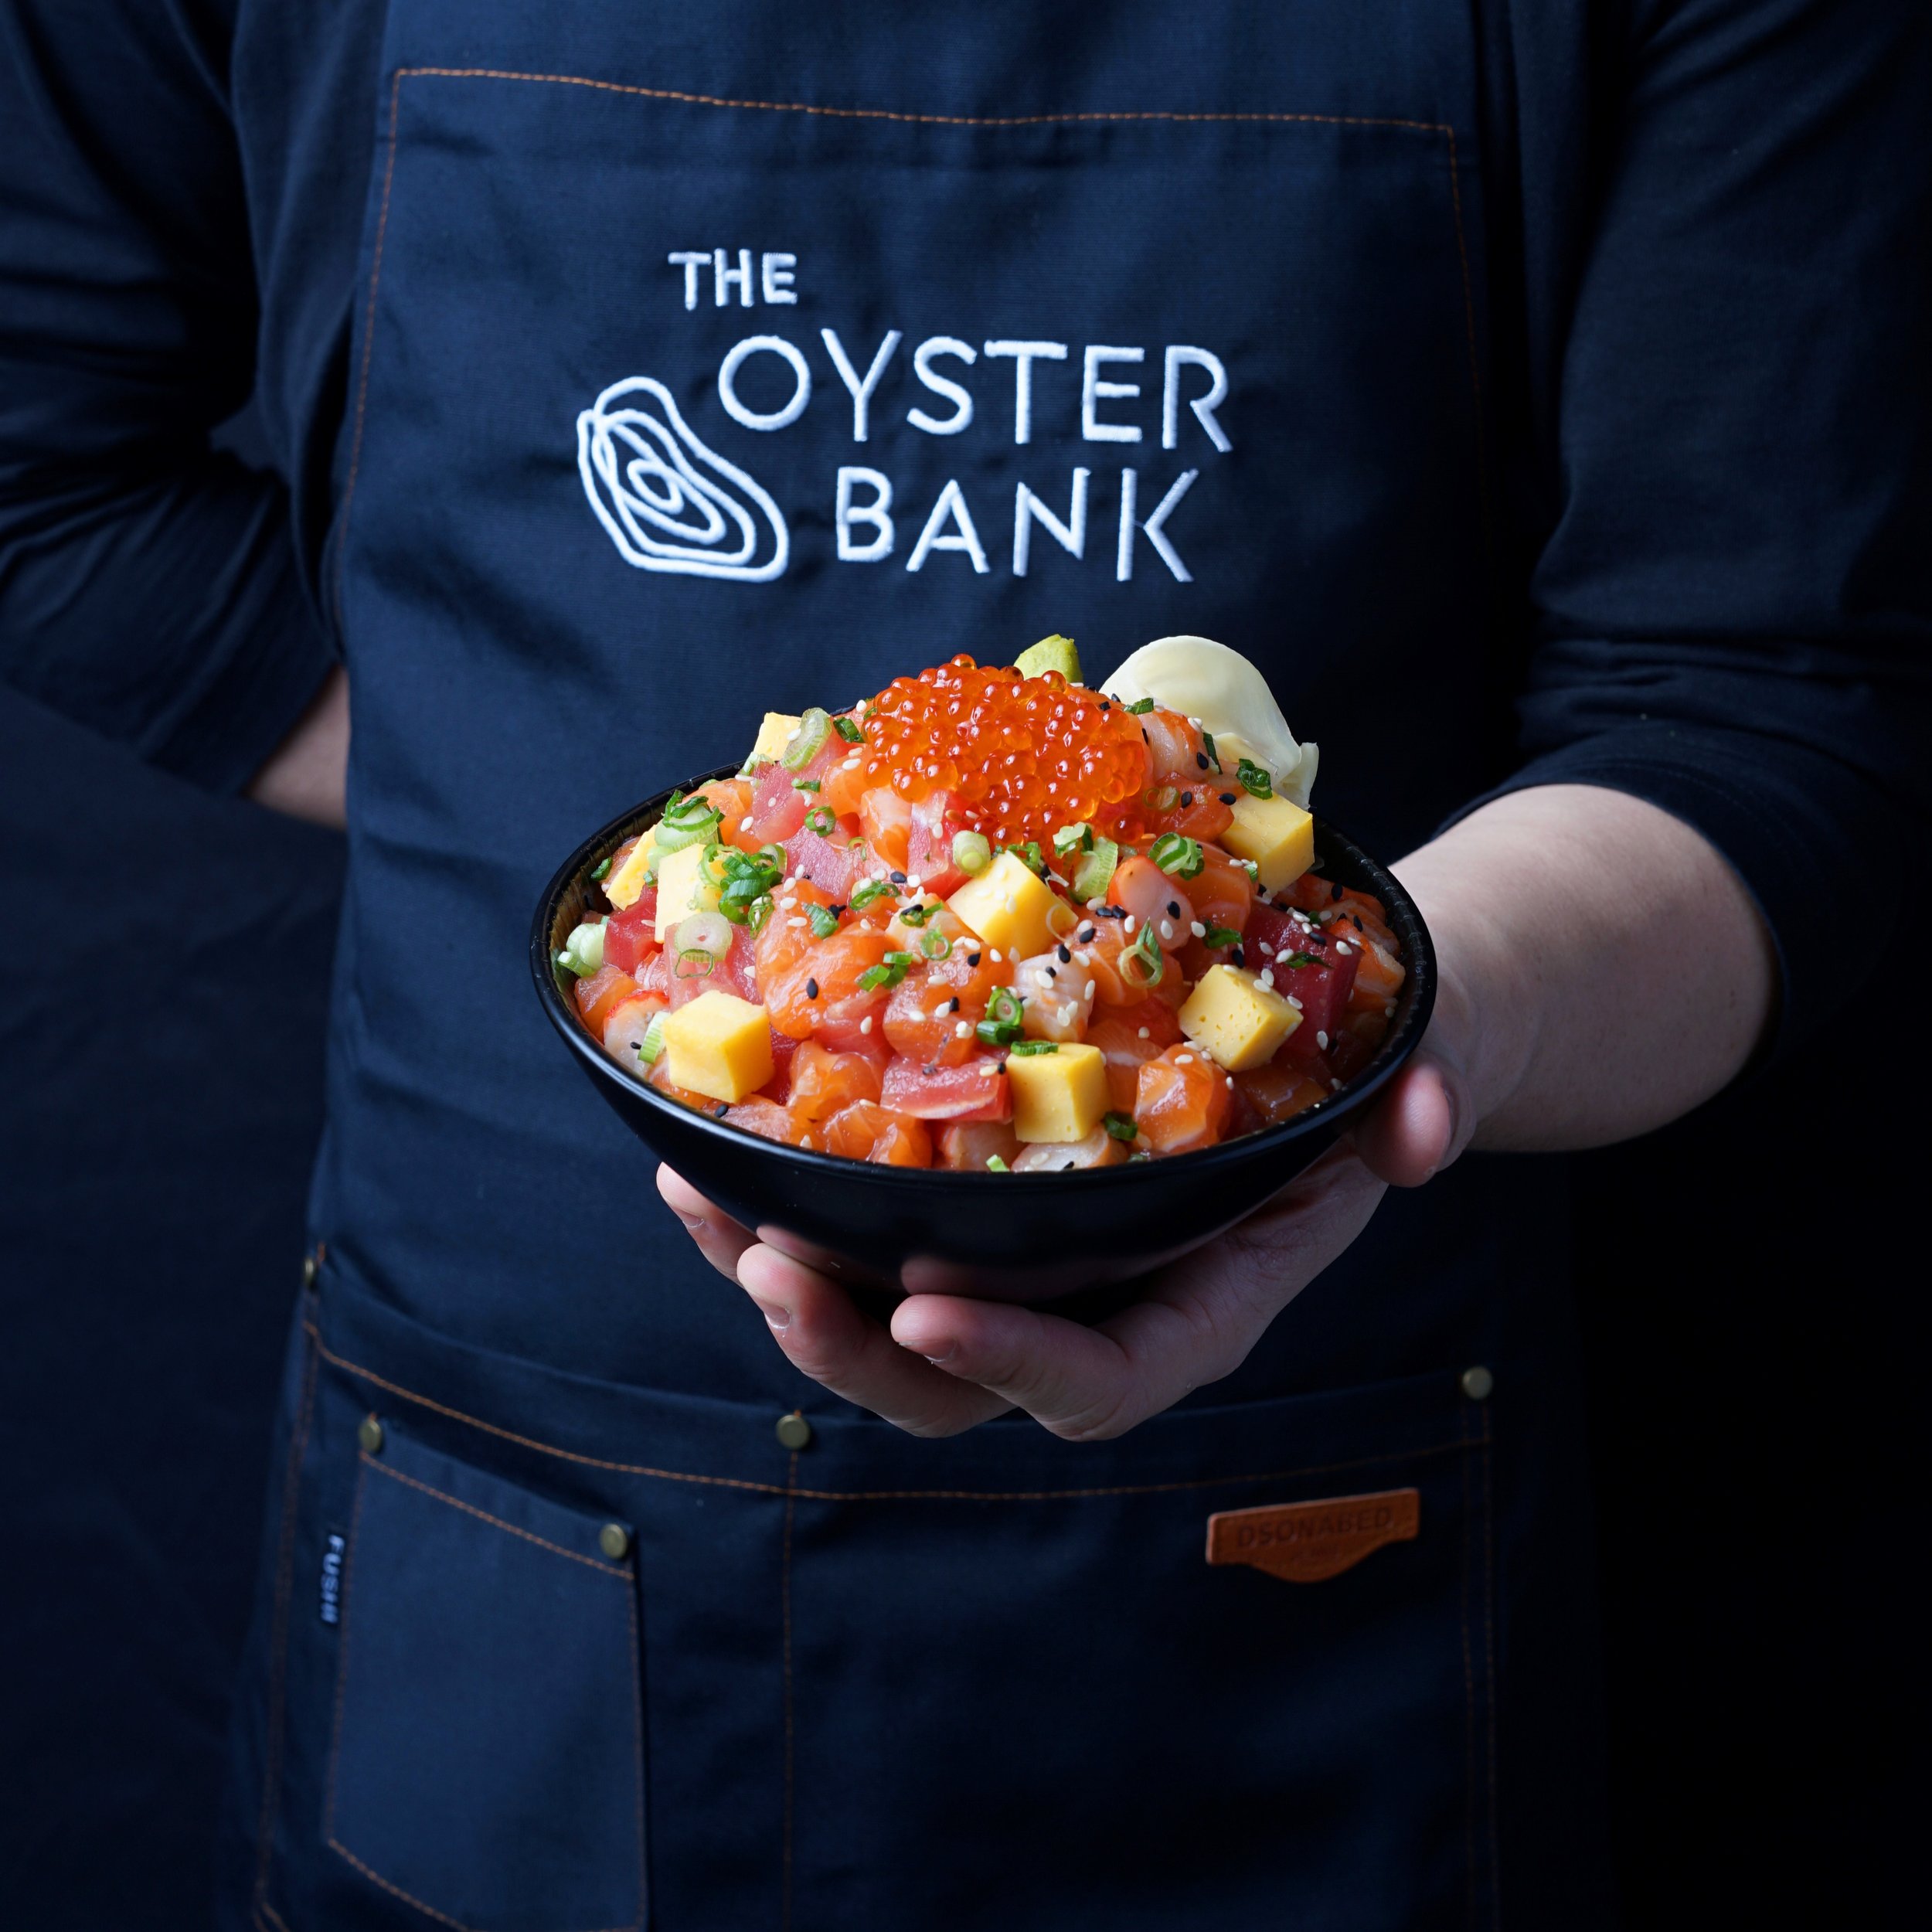 THE OYSTER BANK 27 crop.jpg